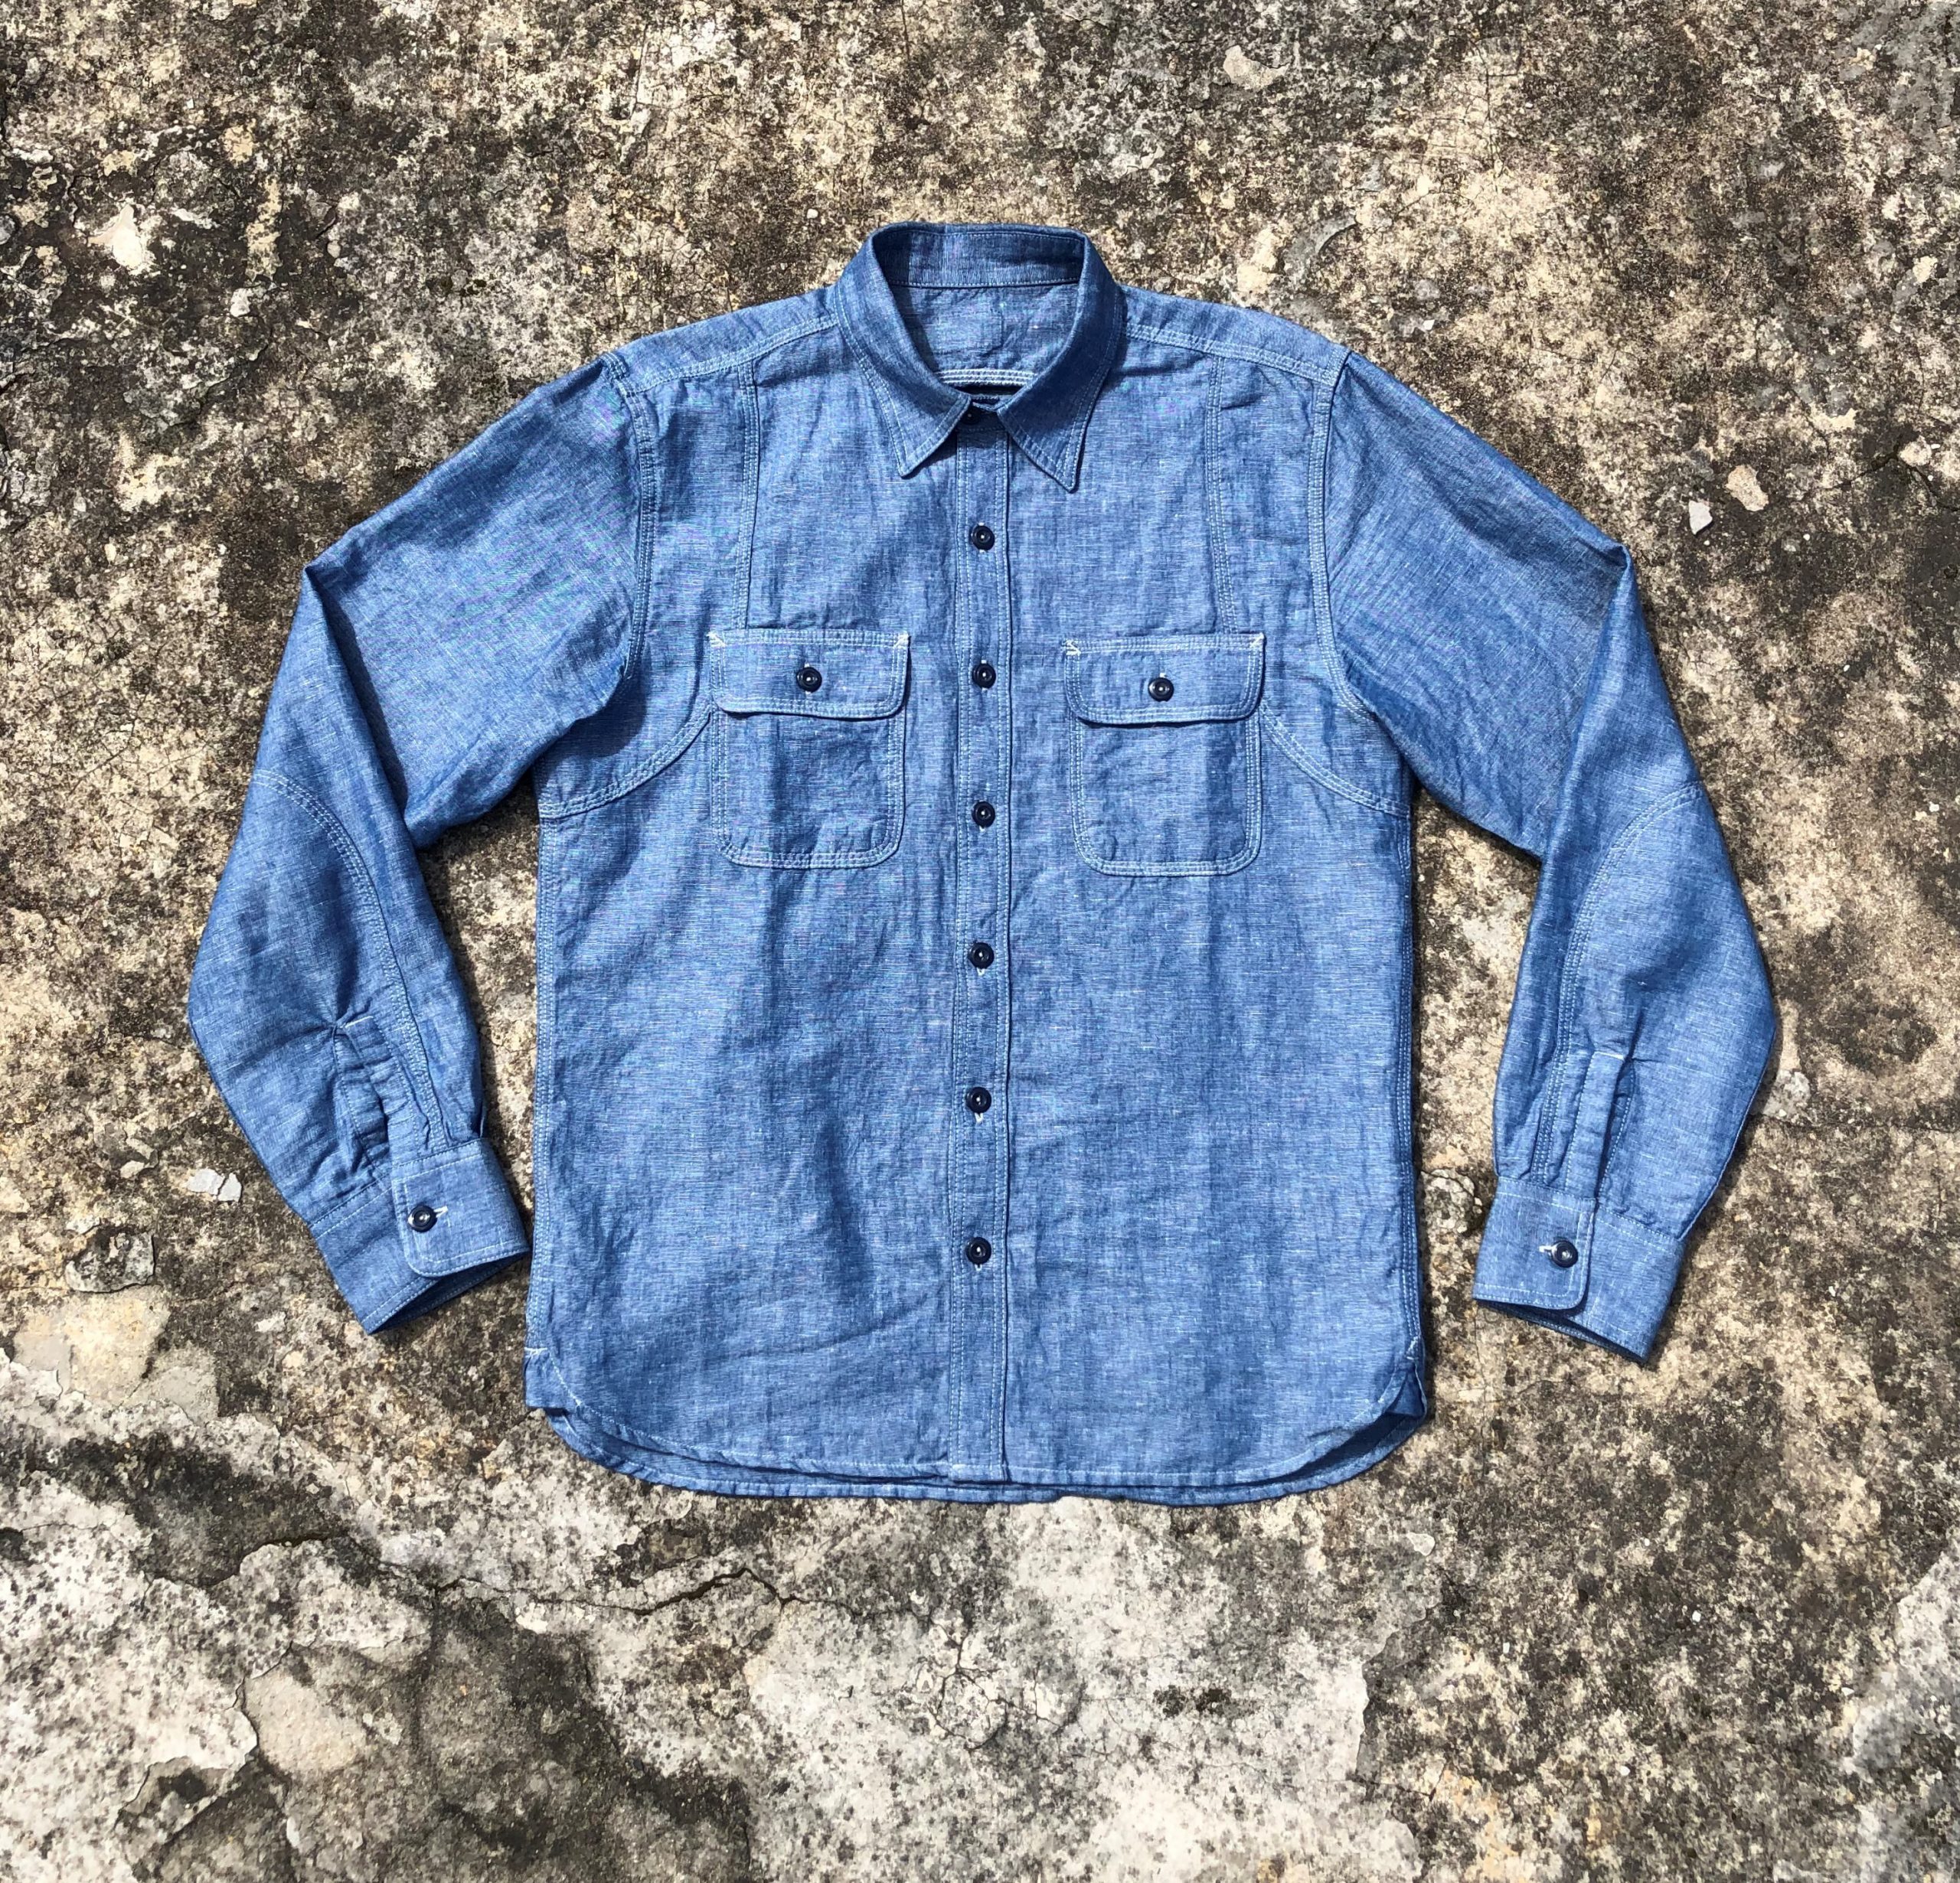 The Good-Natured Chambray Shirt 1920s Style - Kind Supply Co.